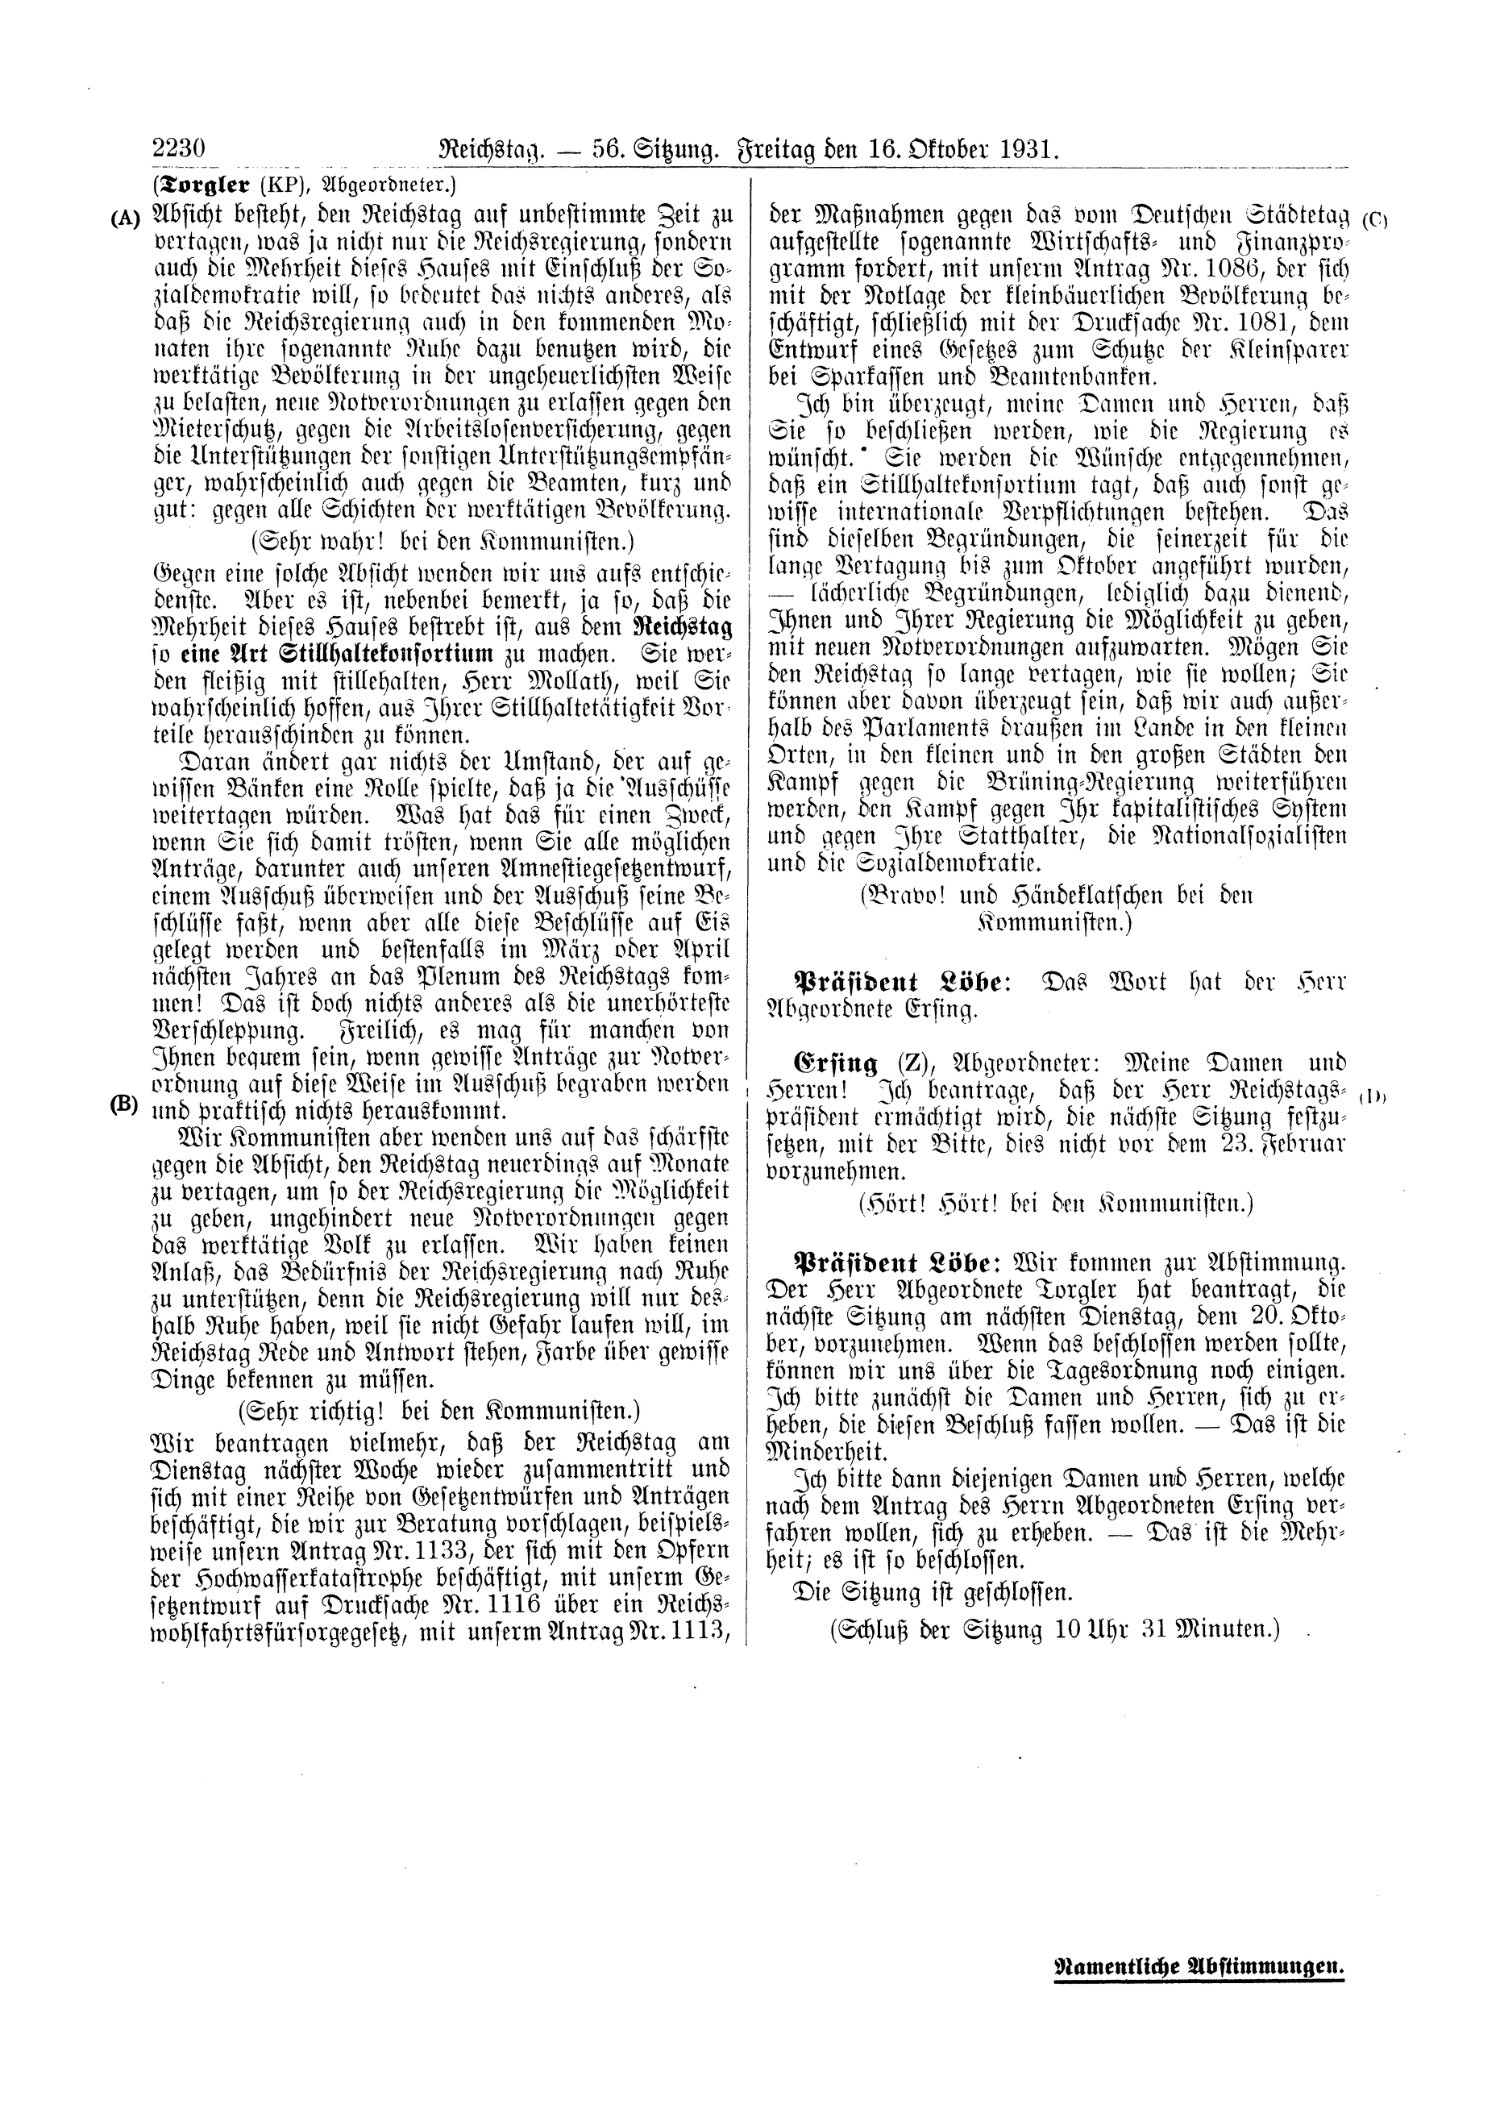 Scan of page 2230